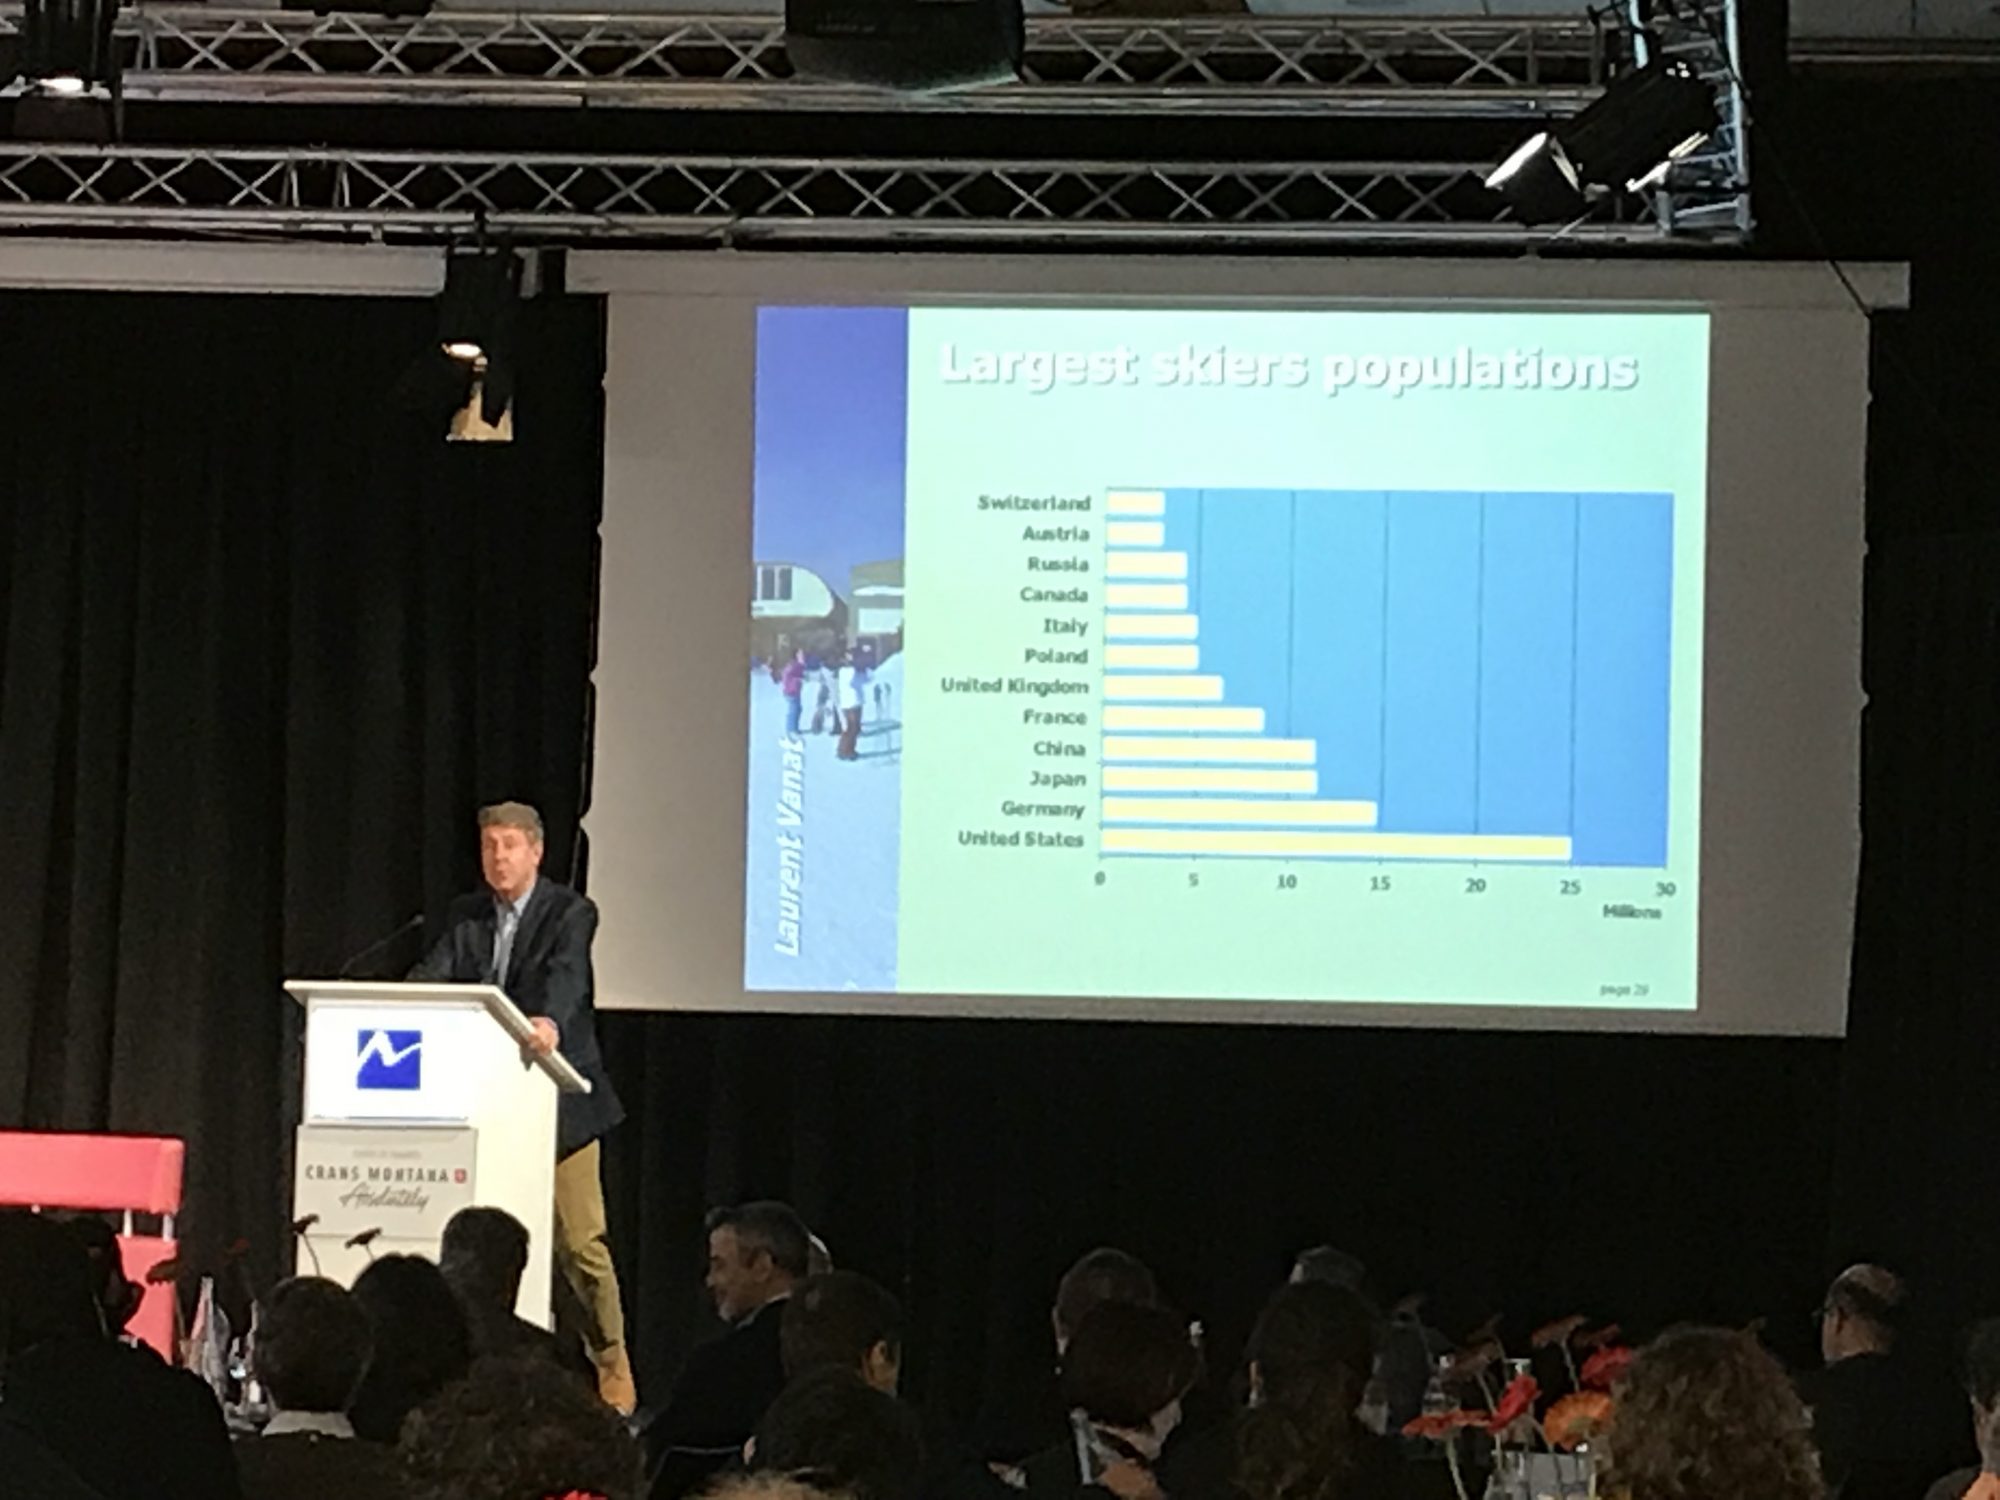 Laurent Vanat at the 2nd European Mountain Travel Summit at Crans Montana, Switzerland. Photo by The-Ski-Guru. Final chance to participate in crowdfunding of the 2019 International Report on Snow & Mountain Tourism.